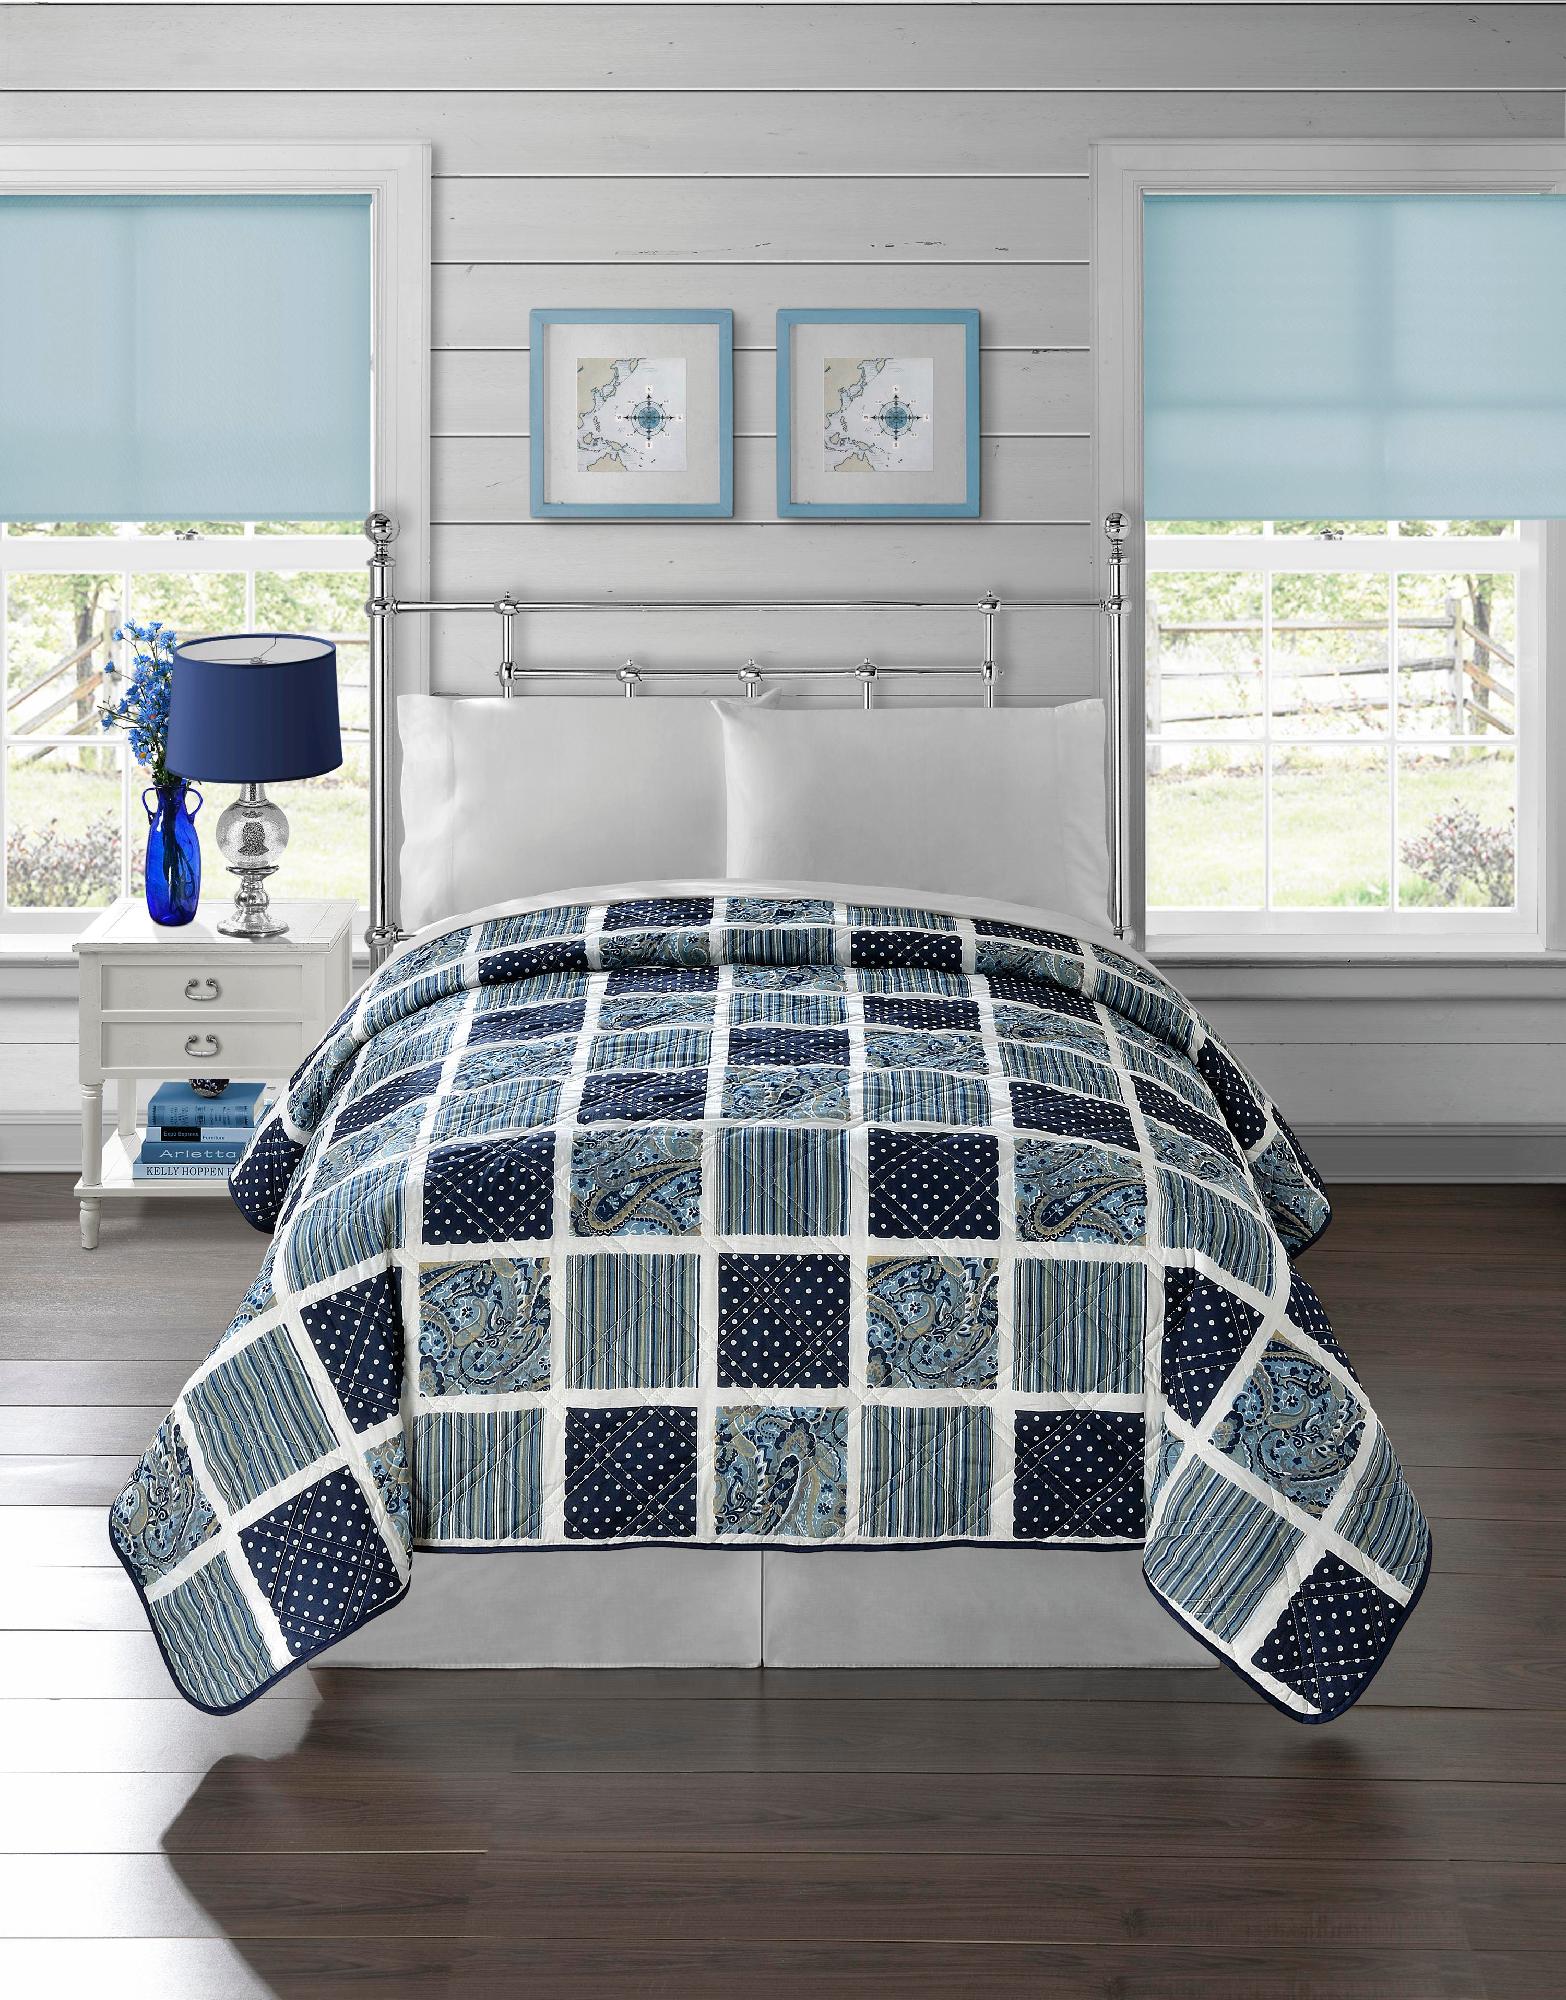 Great Price Quilt - Colette